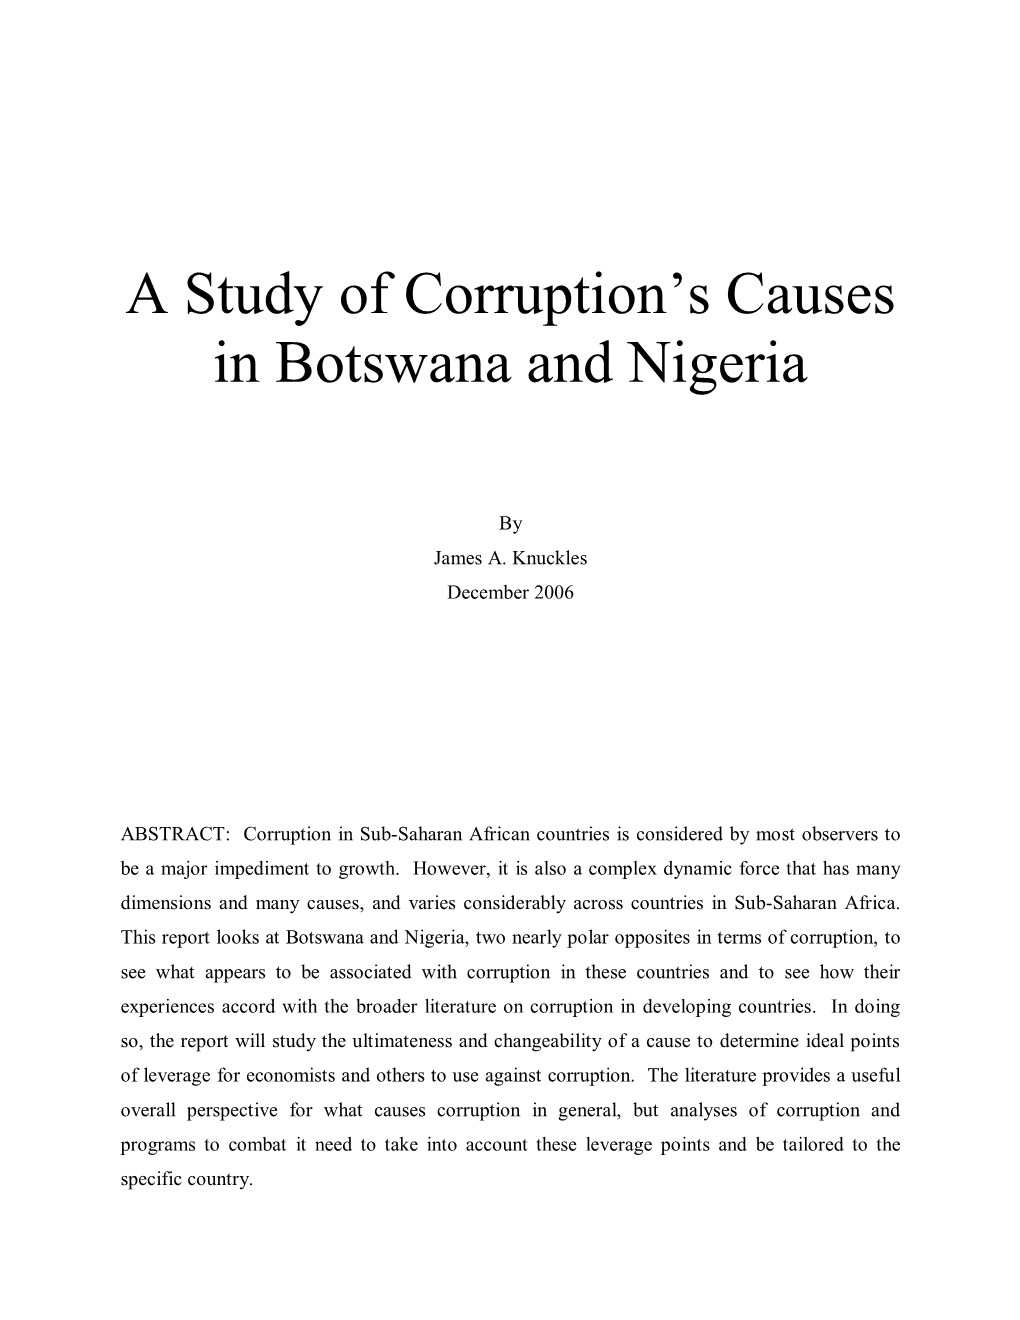 A Study of Corruption's Causes in Botswana and Nigeria